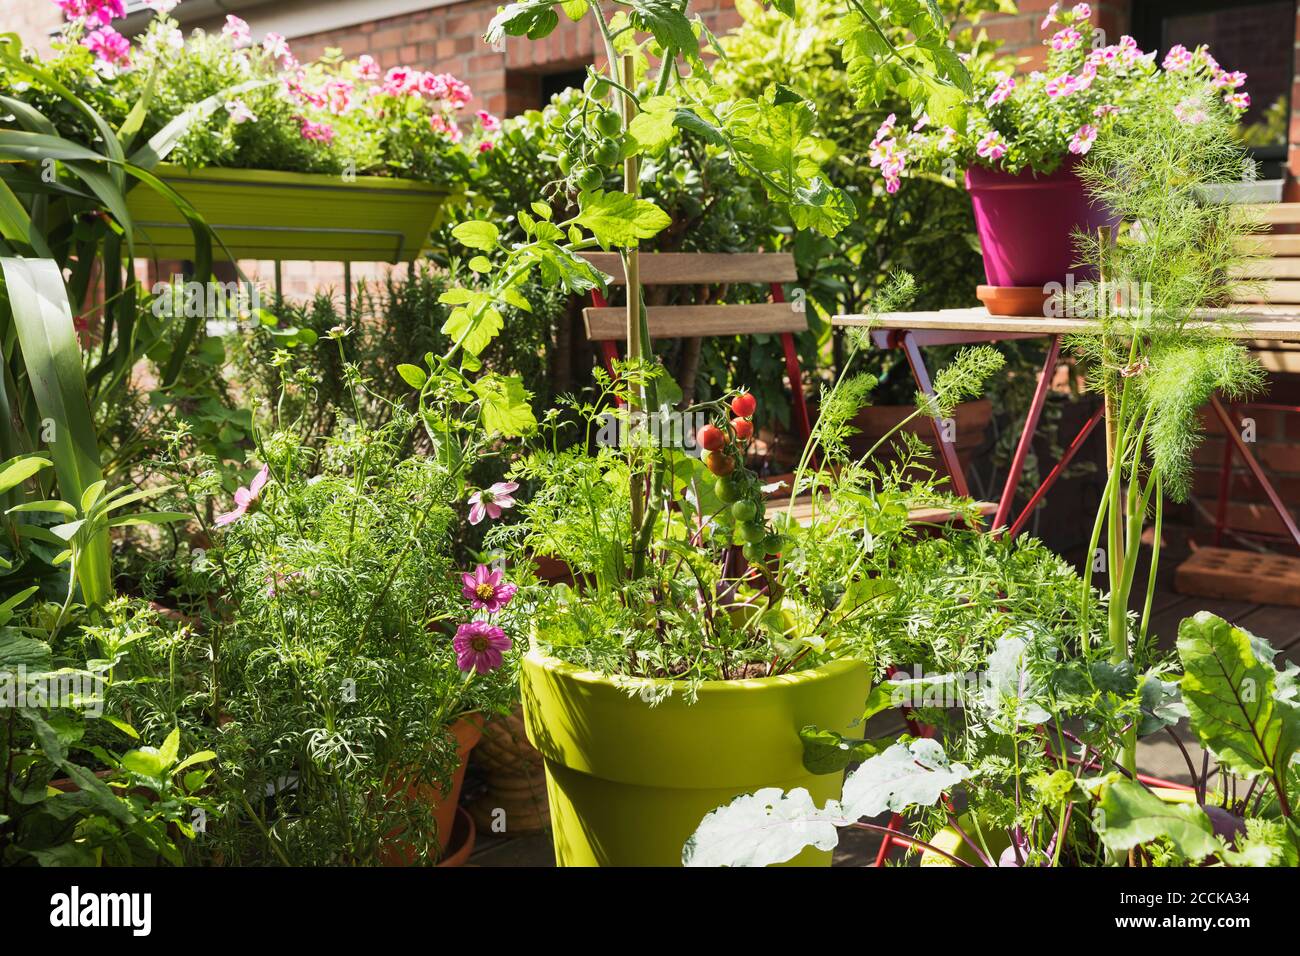 Vegetables growing in recycled plastic plant pots on balcony Stock Photo